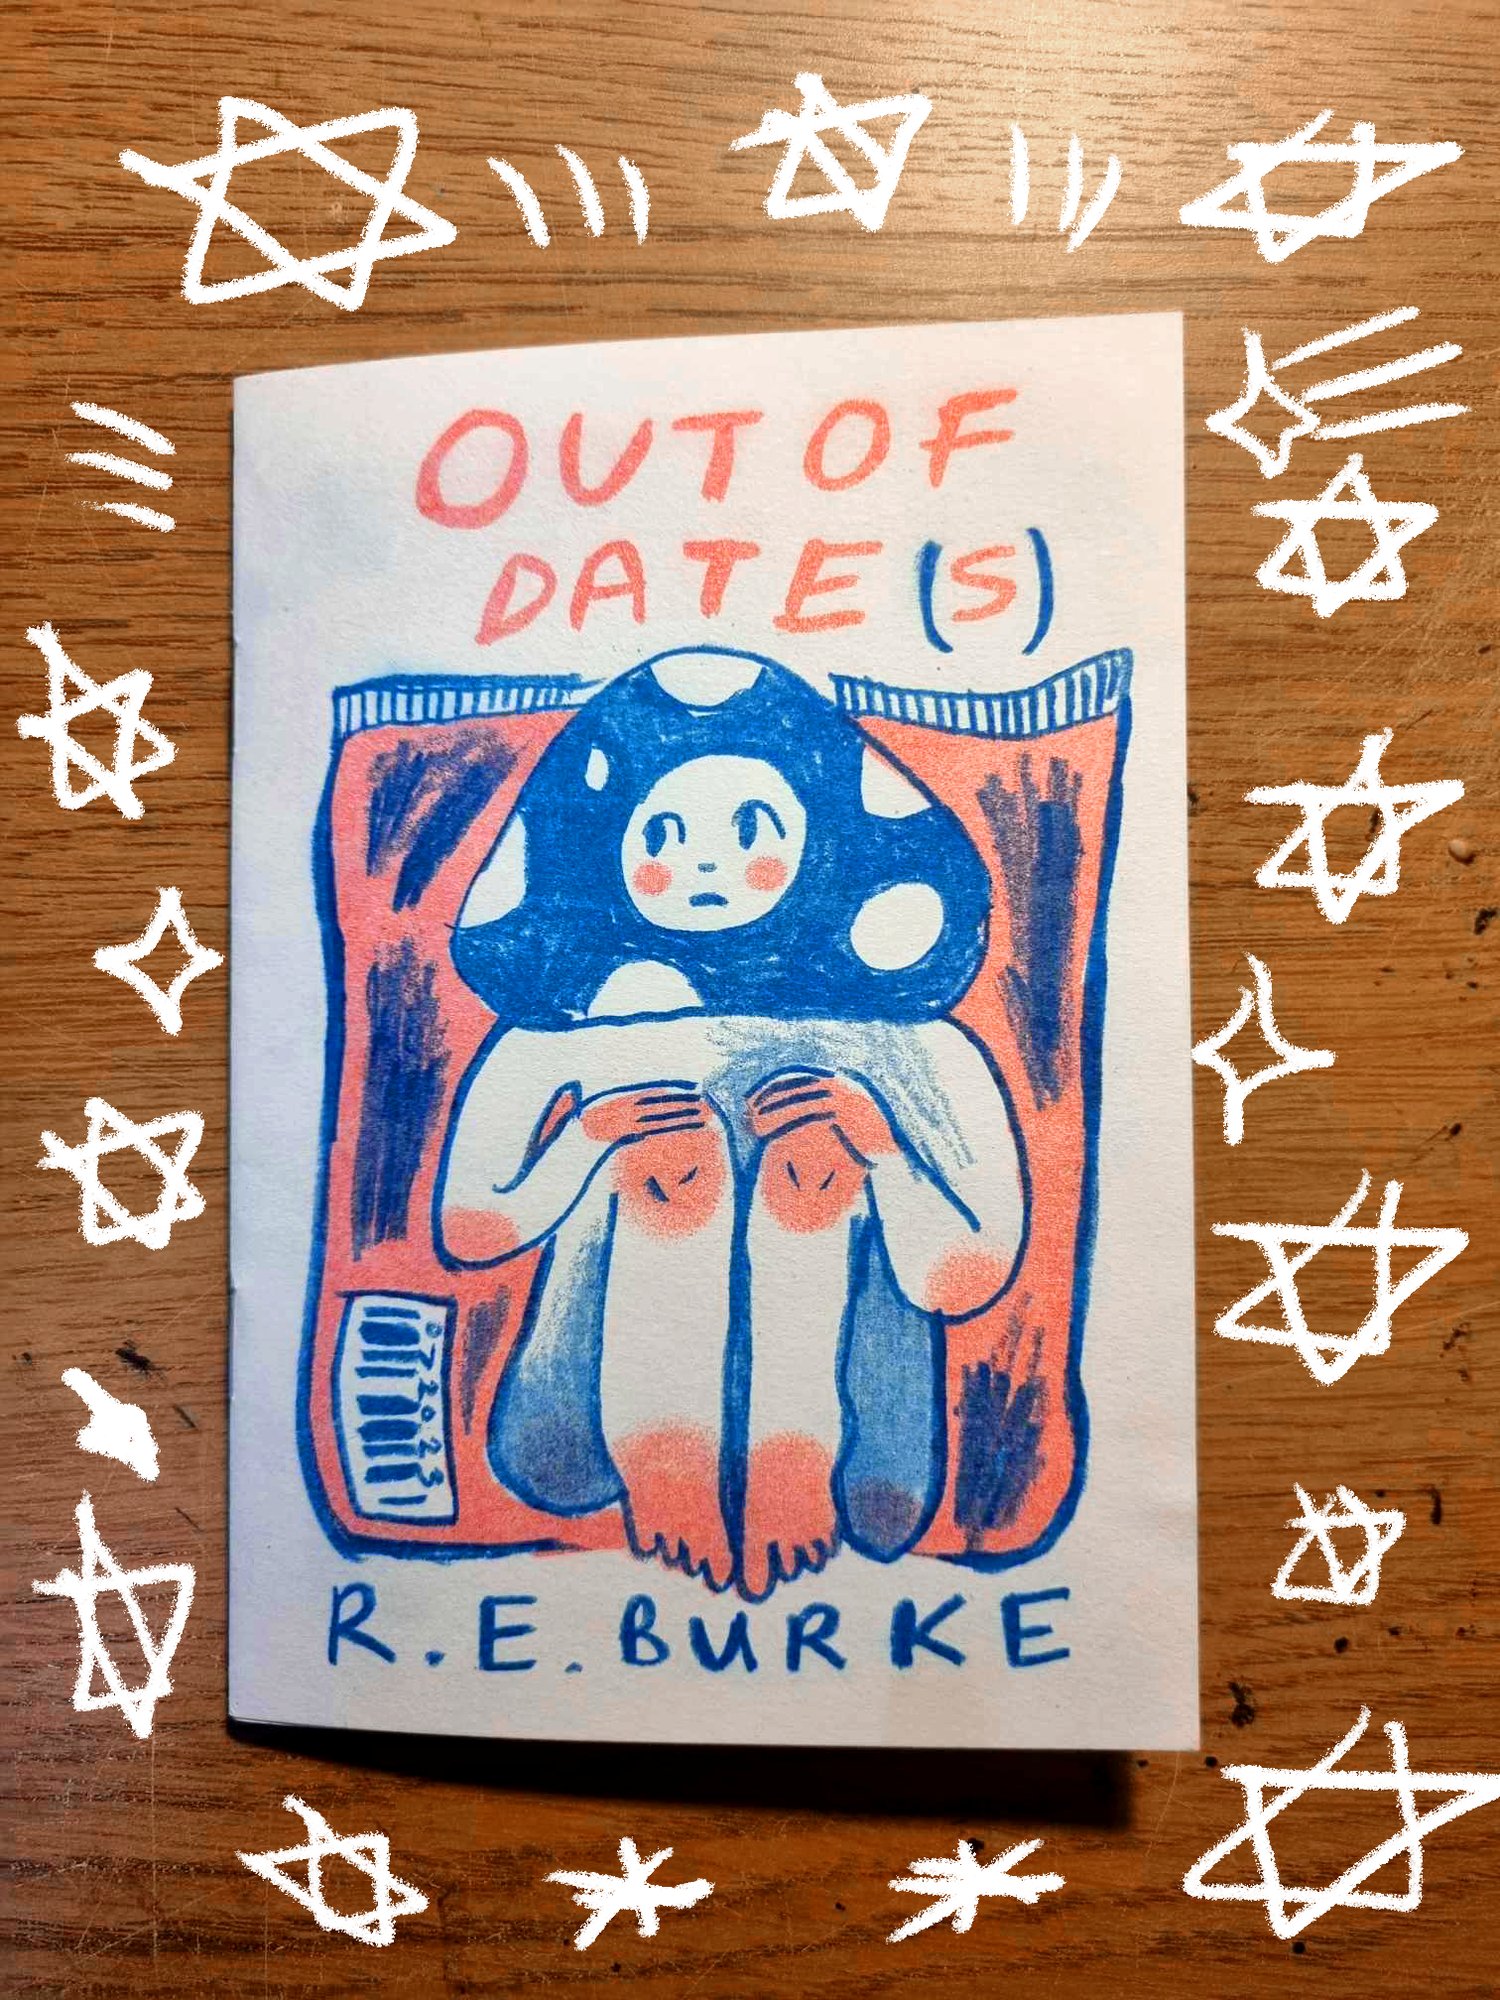 Out of Date(s) #1 - ZINE